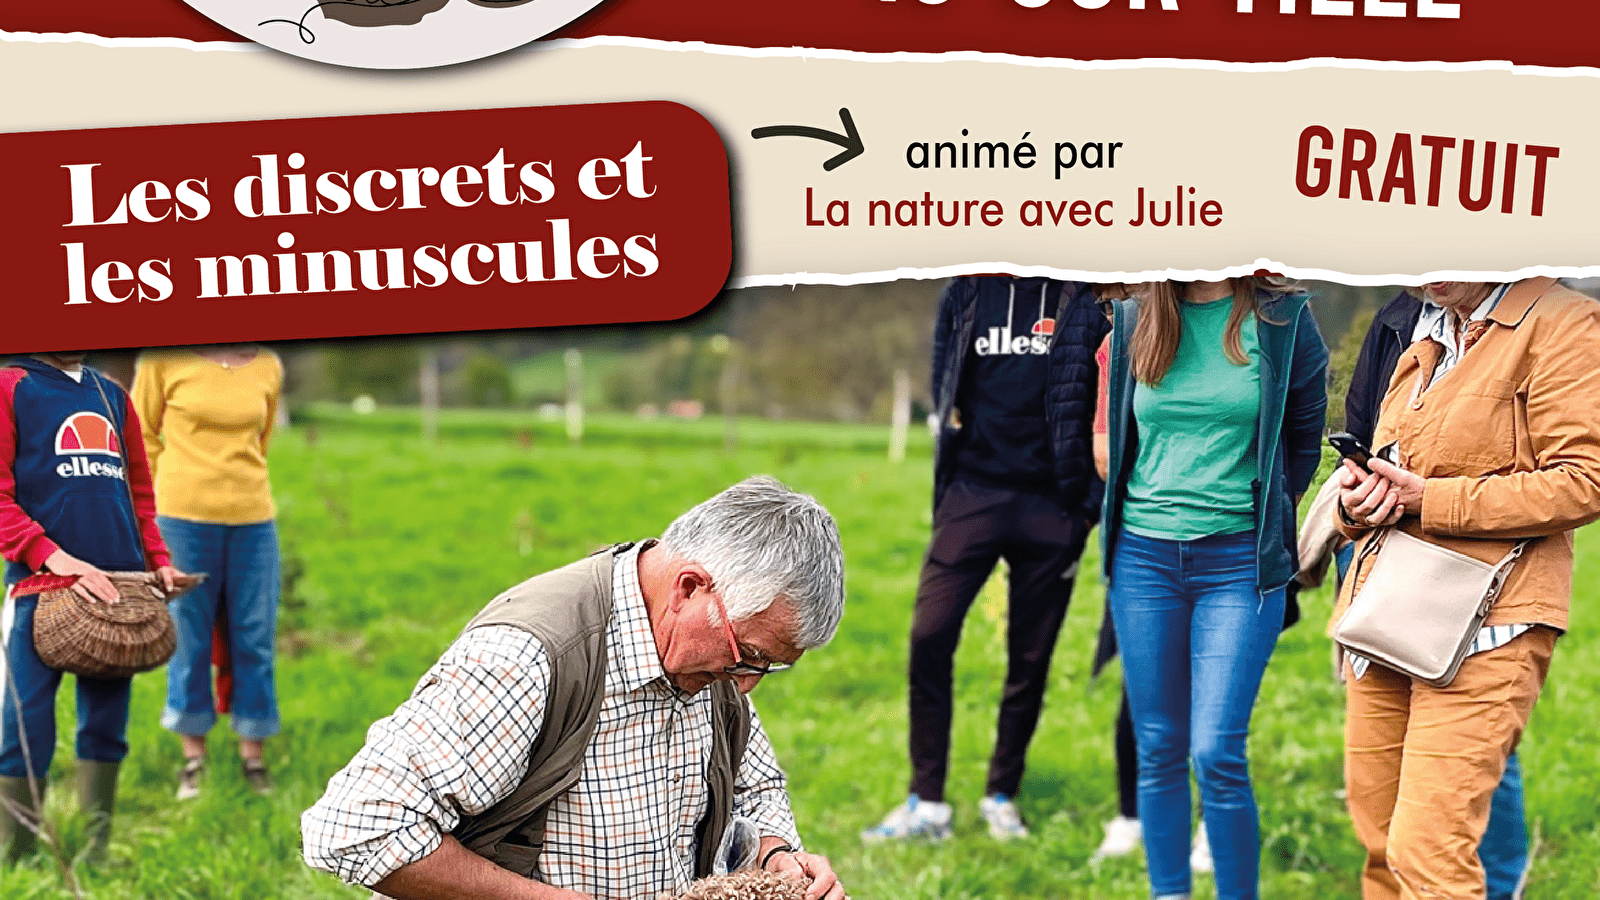 Animations at the truffle field: the discreet and the tiny